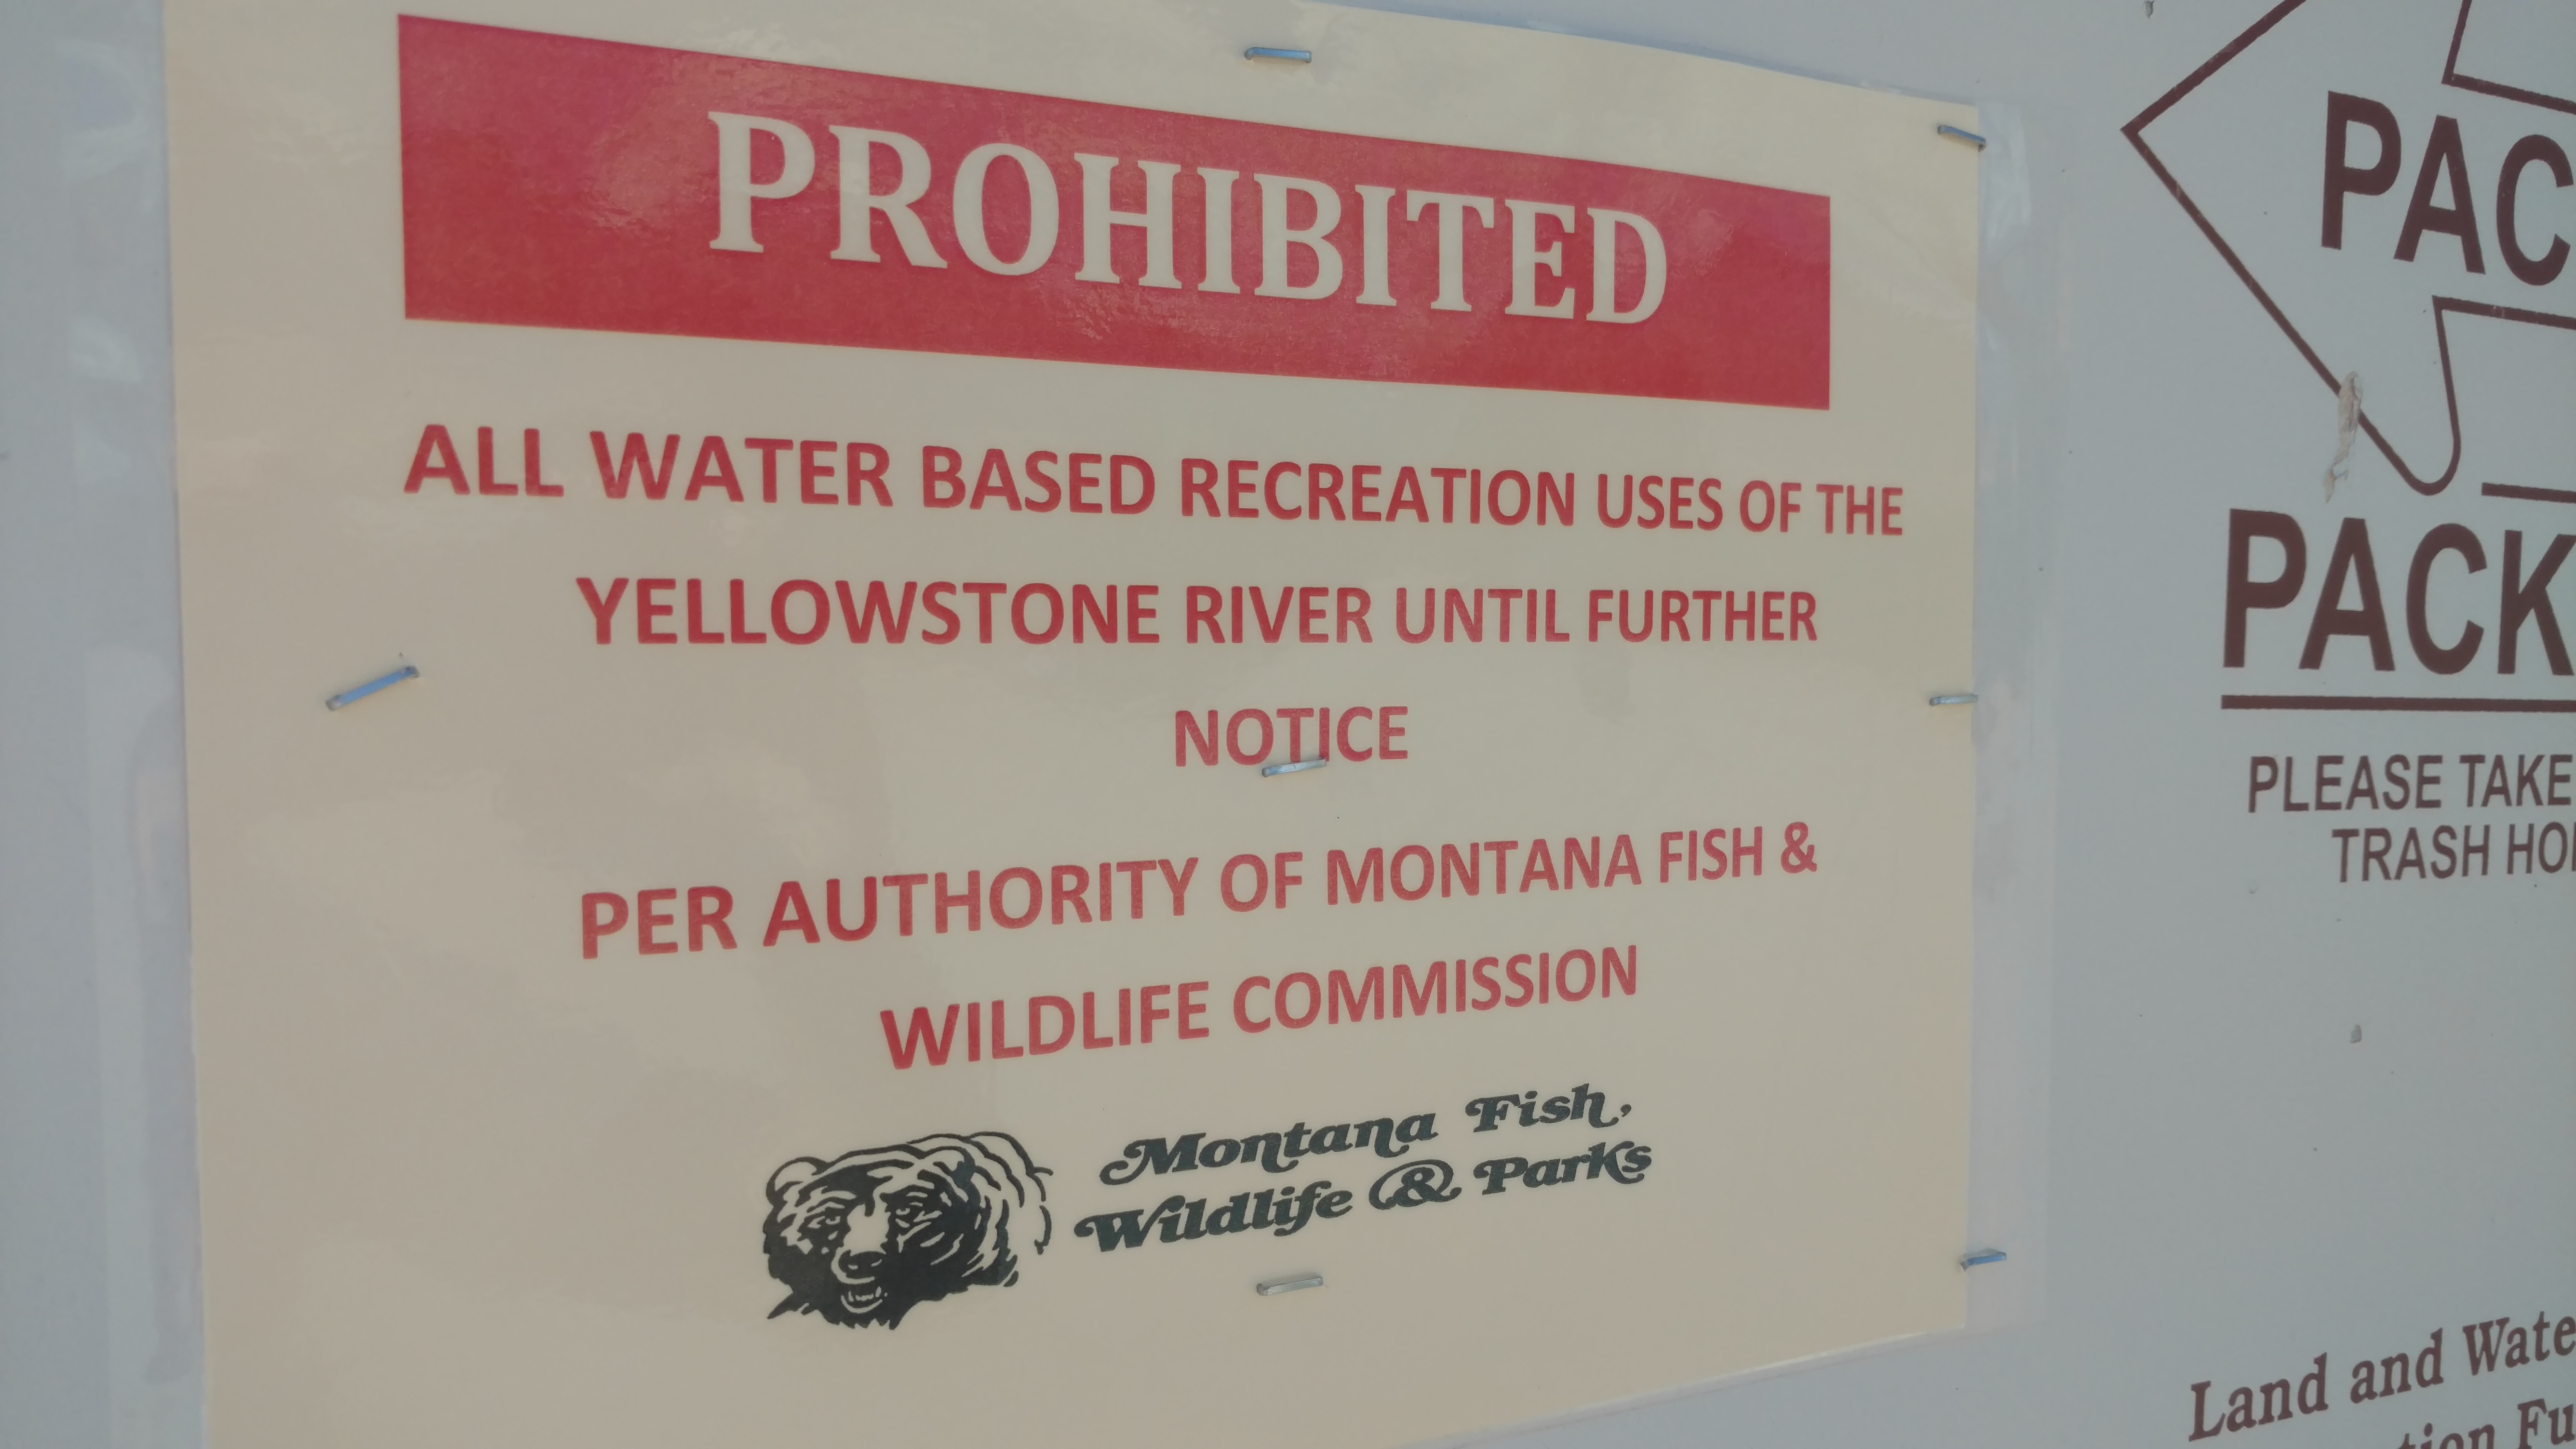 All recreation is closed at the Yellowstone River, MT.  photo:  ryan weaver/explorebigsky.com